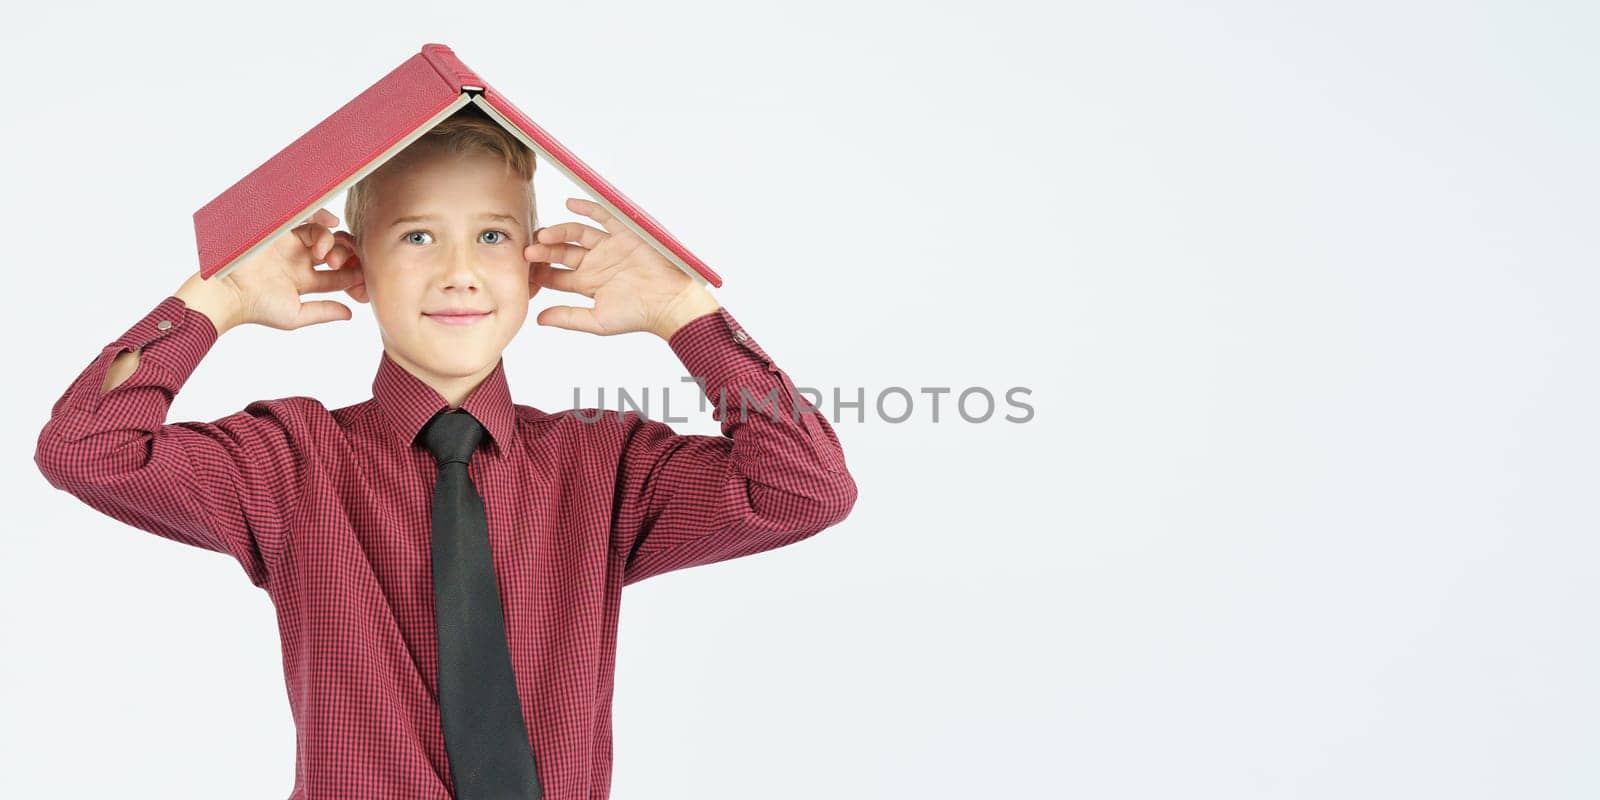 The schoolboy put an open book on his head and covered his ears with his fingers, isolated background. Education concept